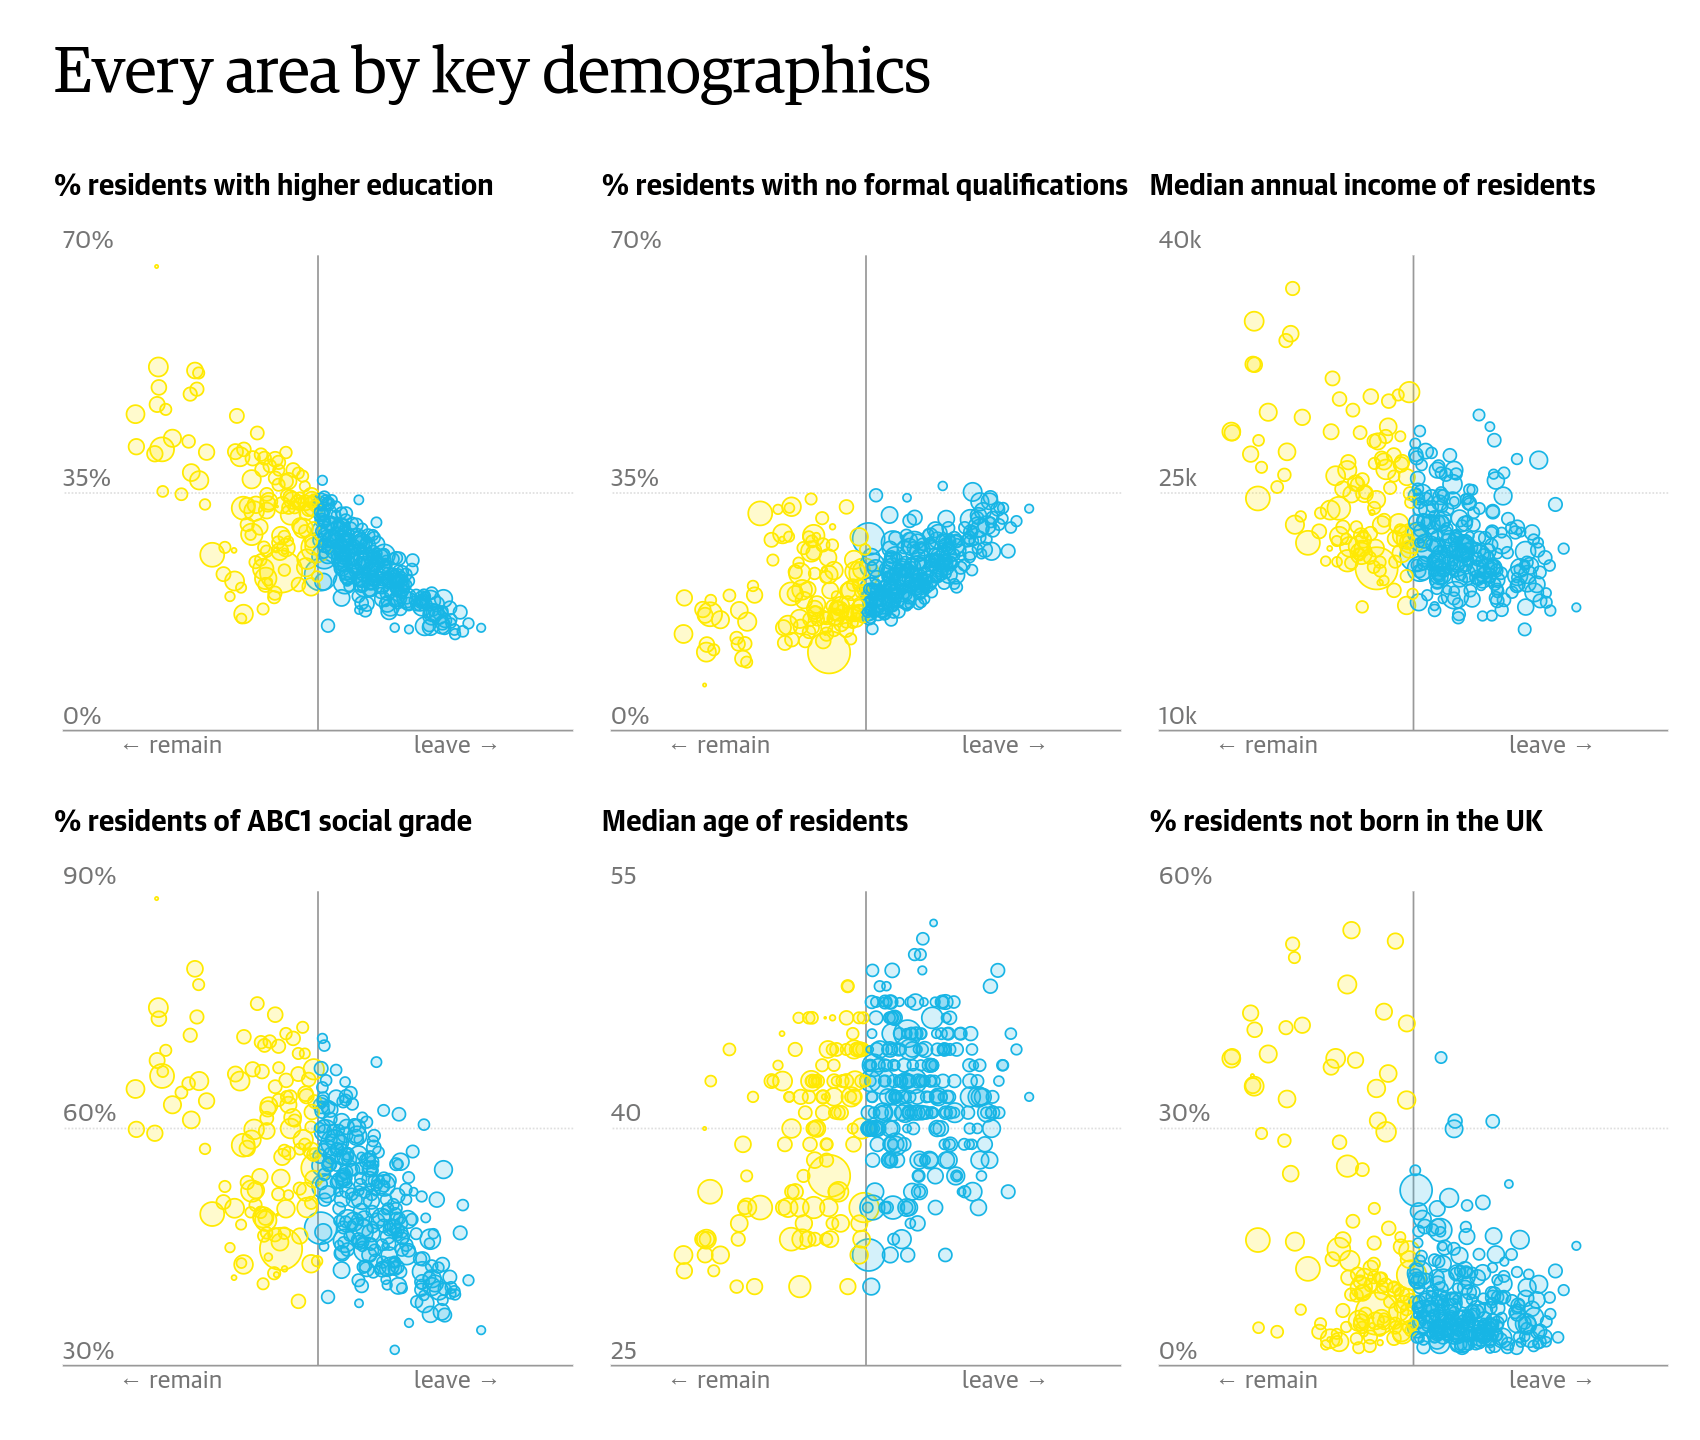 Brexit demographics from The Guardian